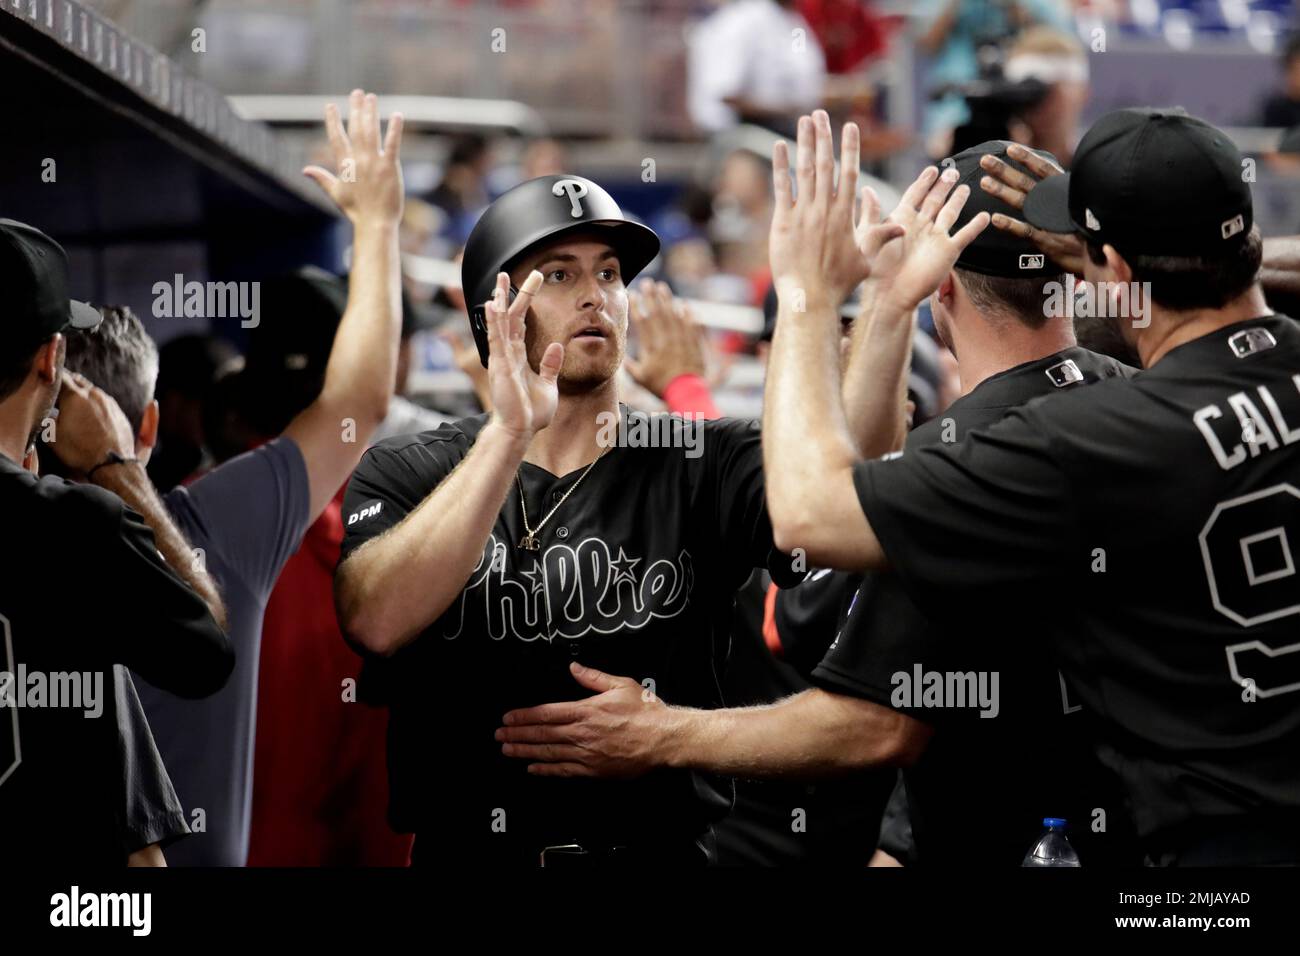 Philadelphia Phillies' Brad Miller is congratulated by his